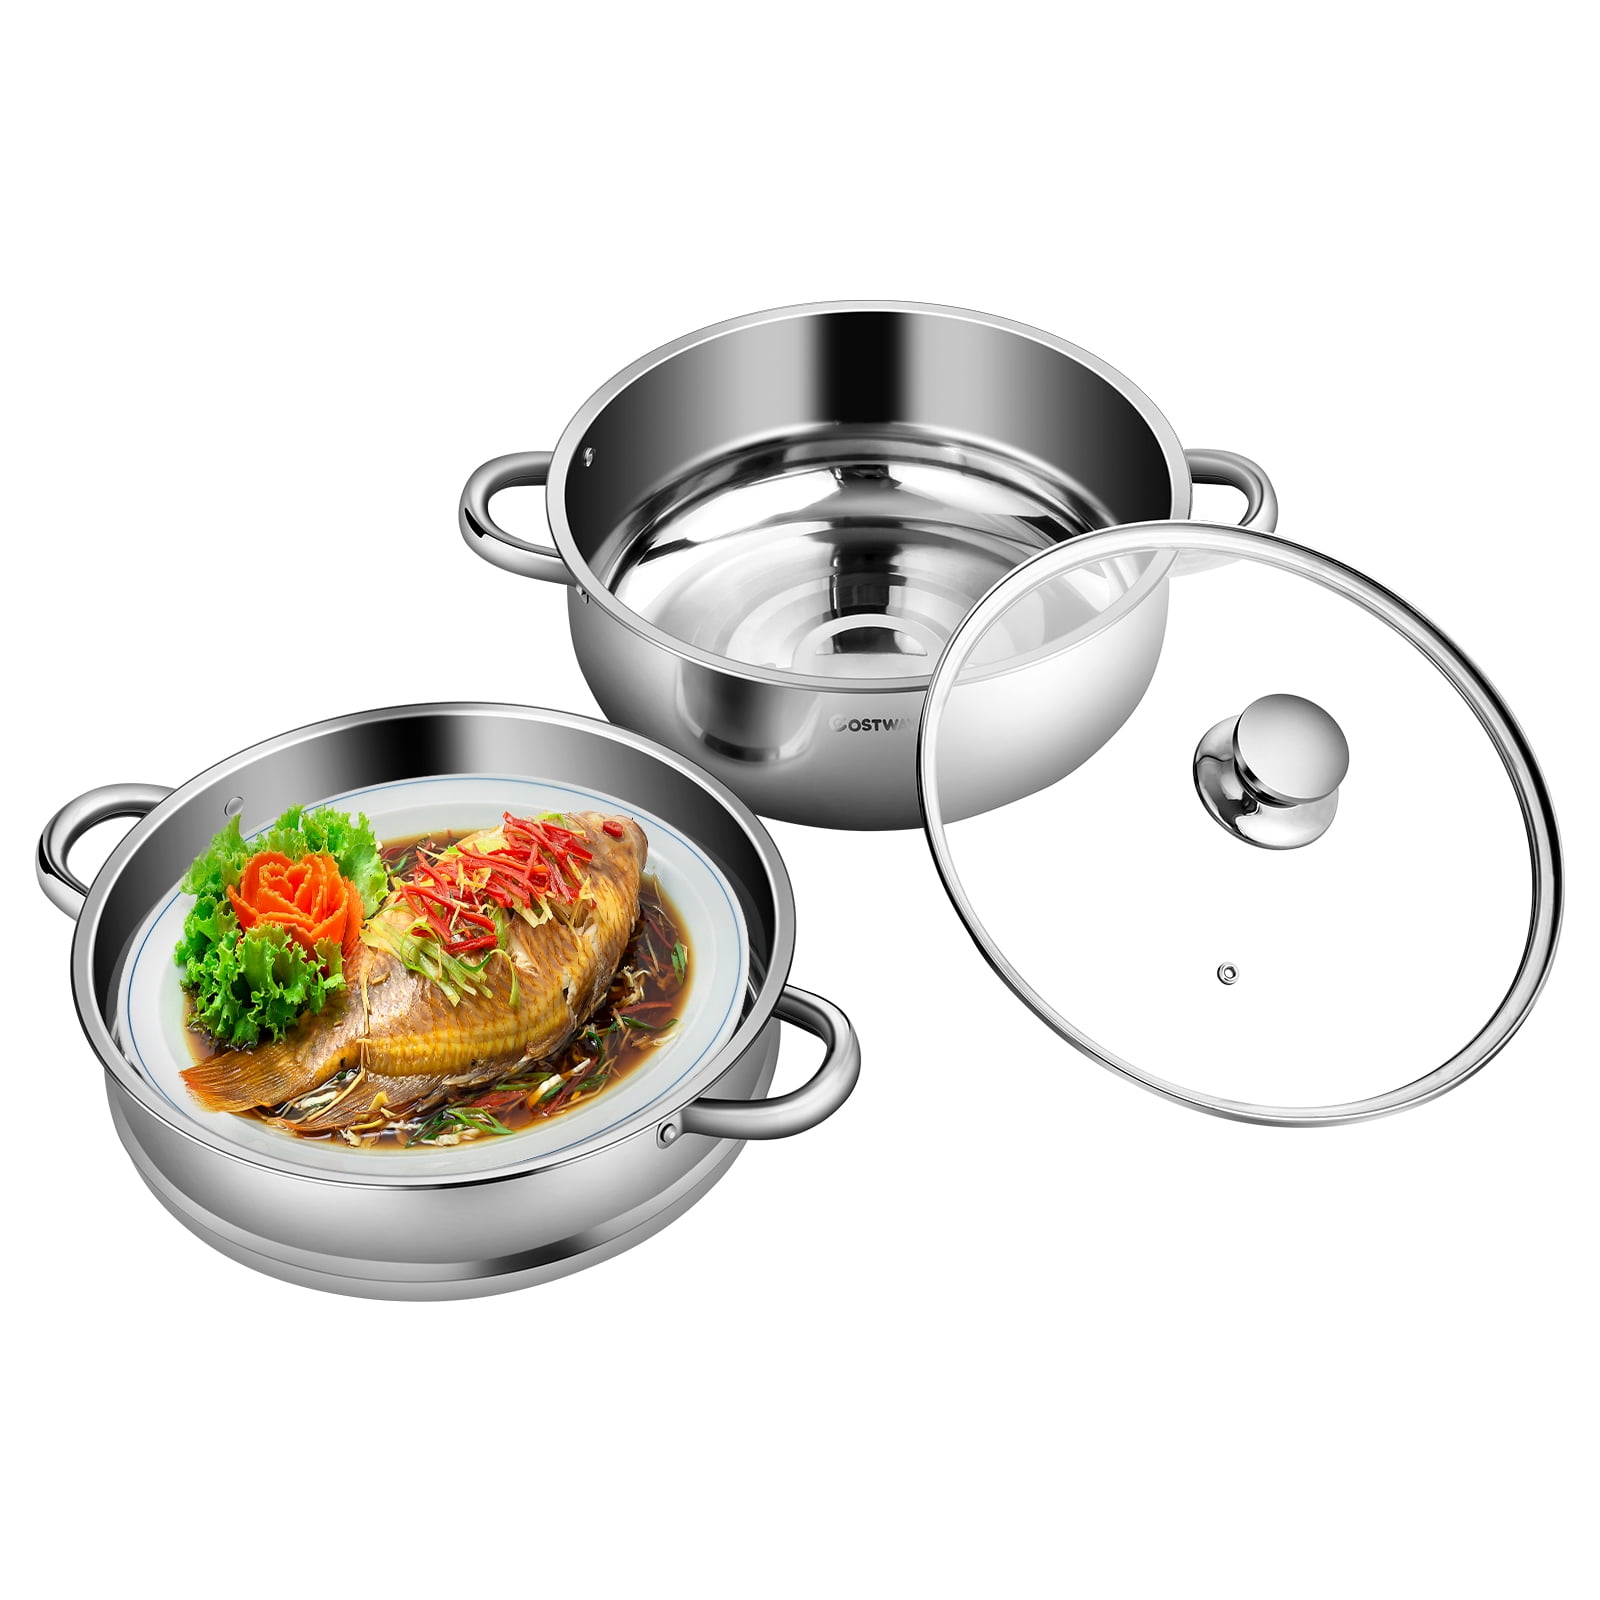 2 PCS Stainless Steel Steamer Pot Set Cookware W/ Tempered Glass Lid ...